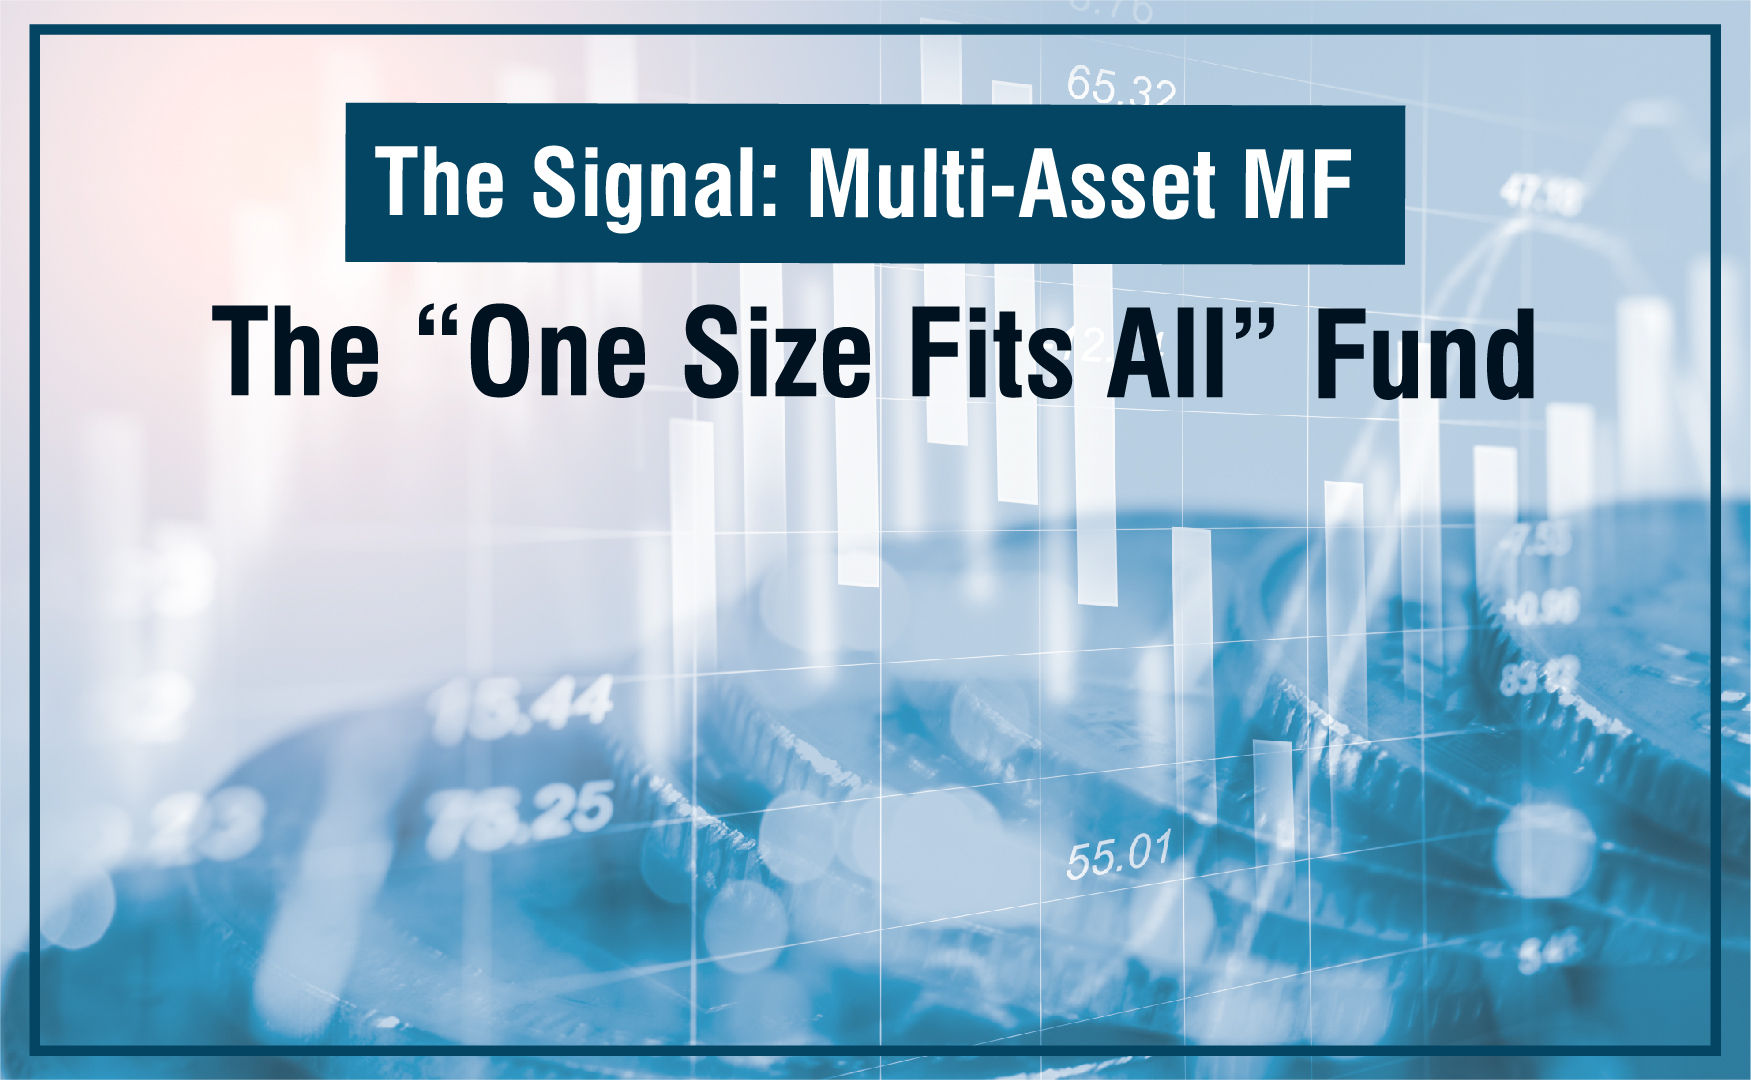 Multi-Asset MF – The “One Size Fits All” Fund